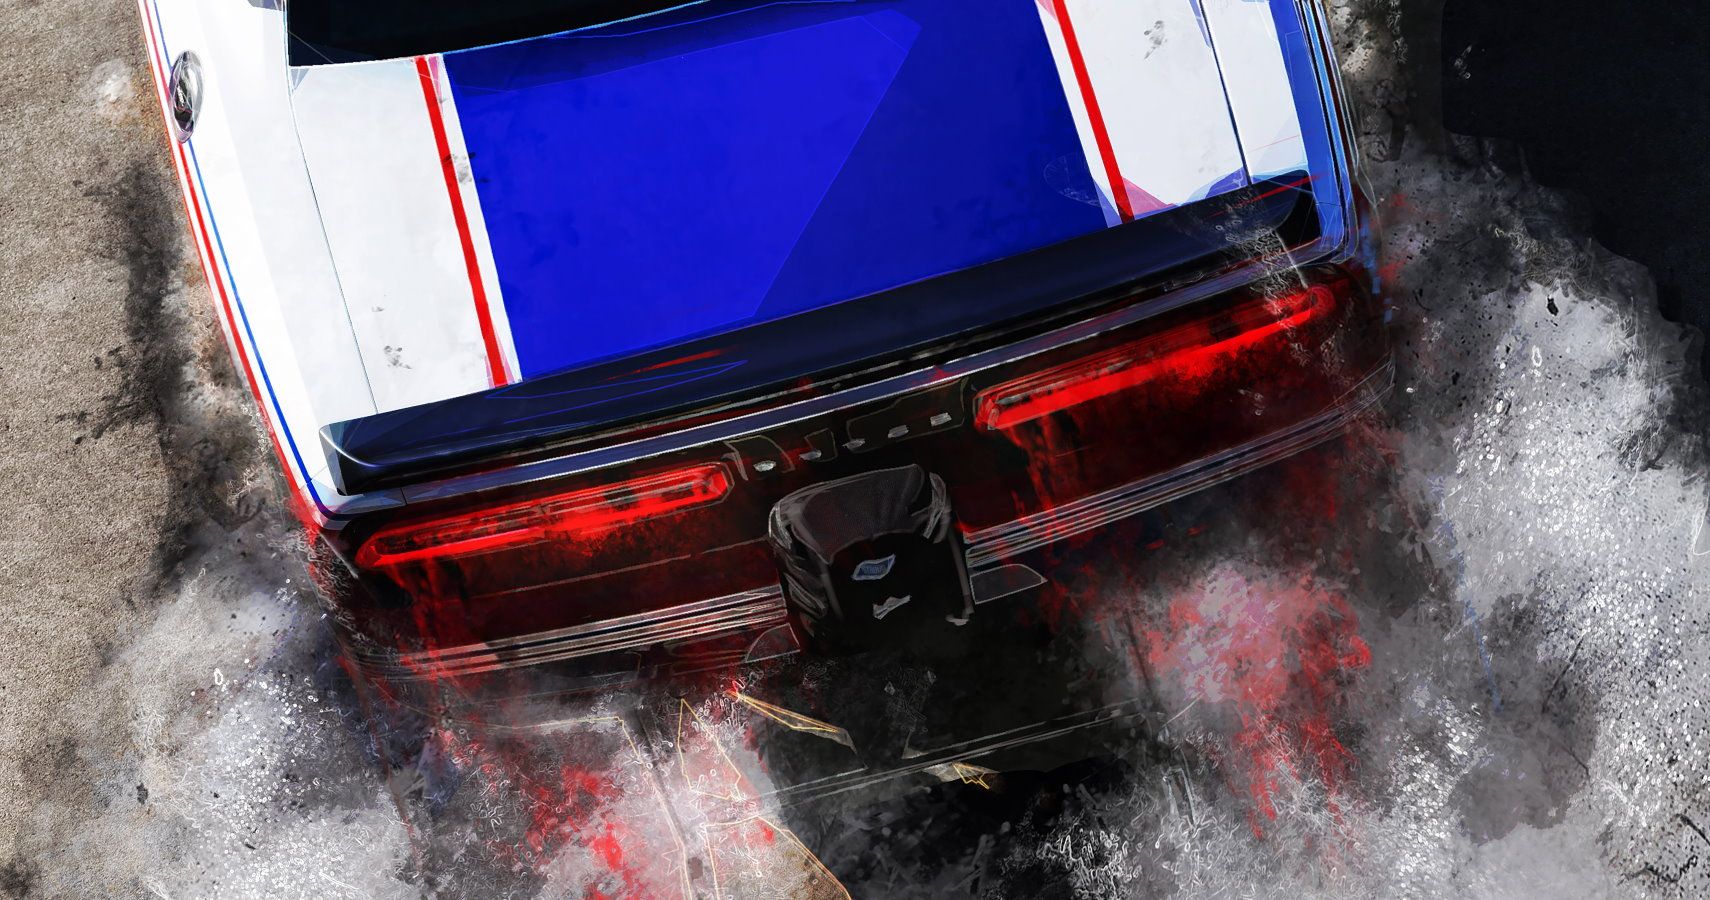 Yet Another Drag Racing Challenger Teased By Dodge Ahead Of SEMA